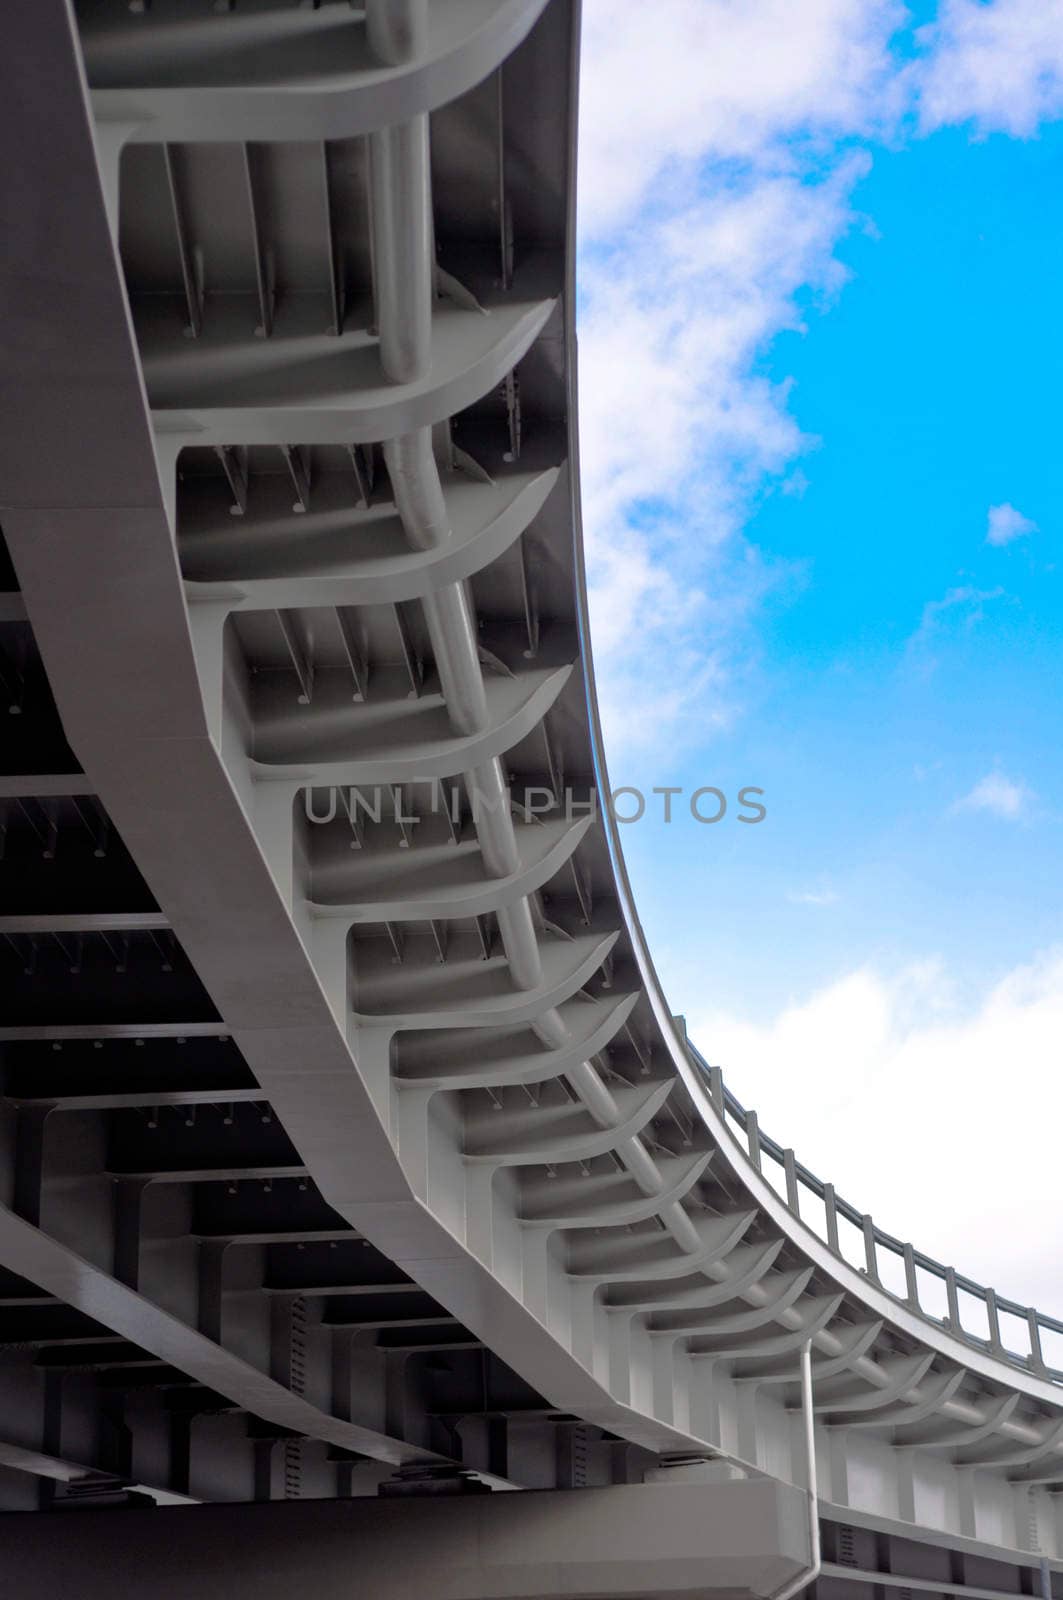 automobile overpass on background of blue sky with clouds. bottom view